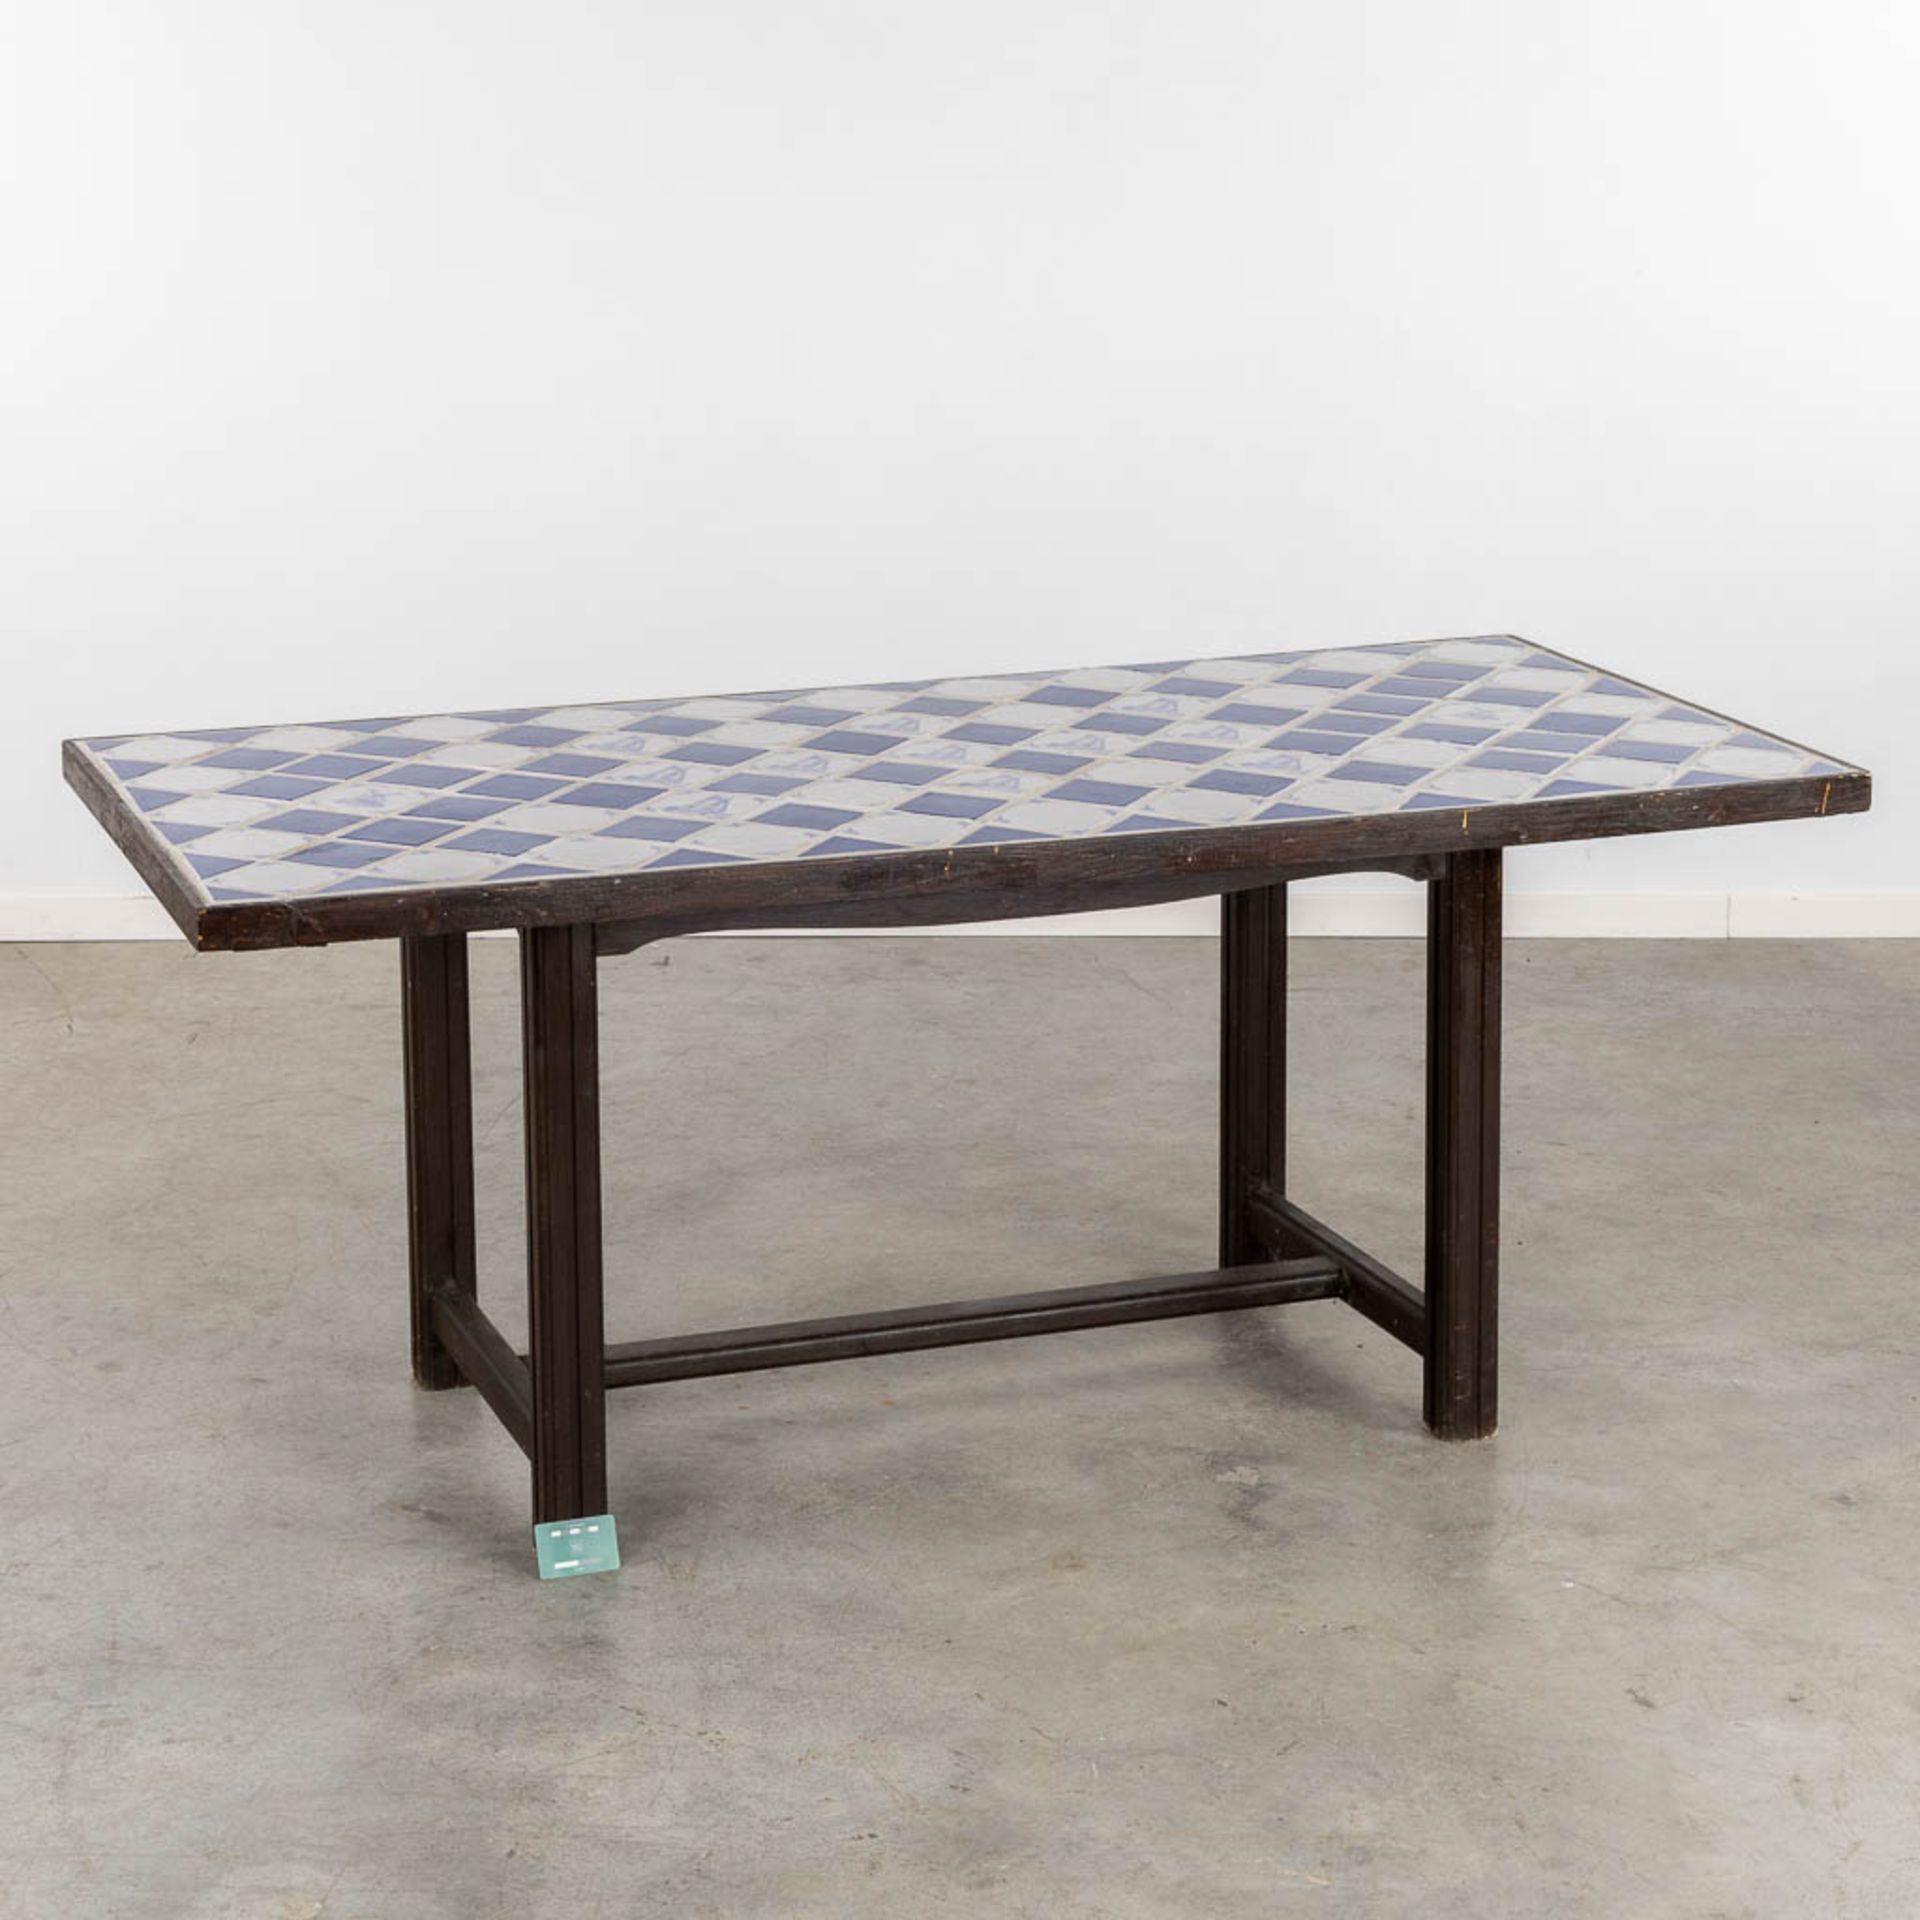 A Spanish table, finished with white and blue tiles. (L:85 x W:184 x H:76 cm) - Bild 2 aus 11